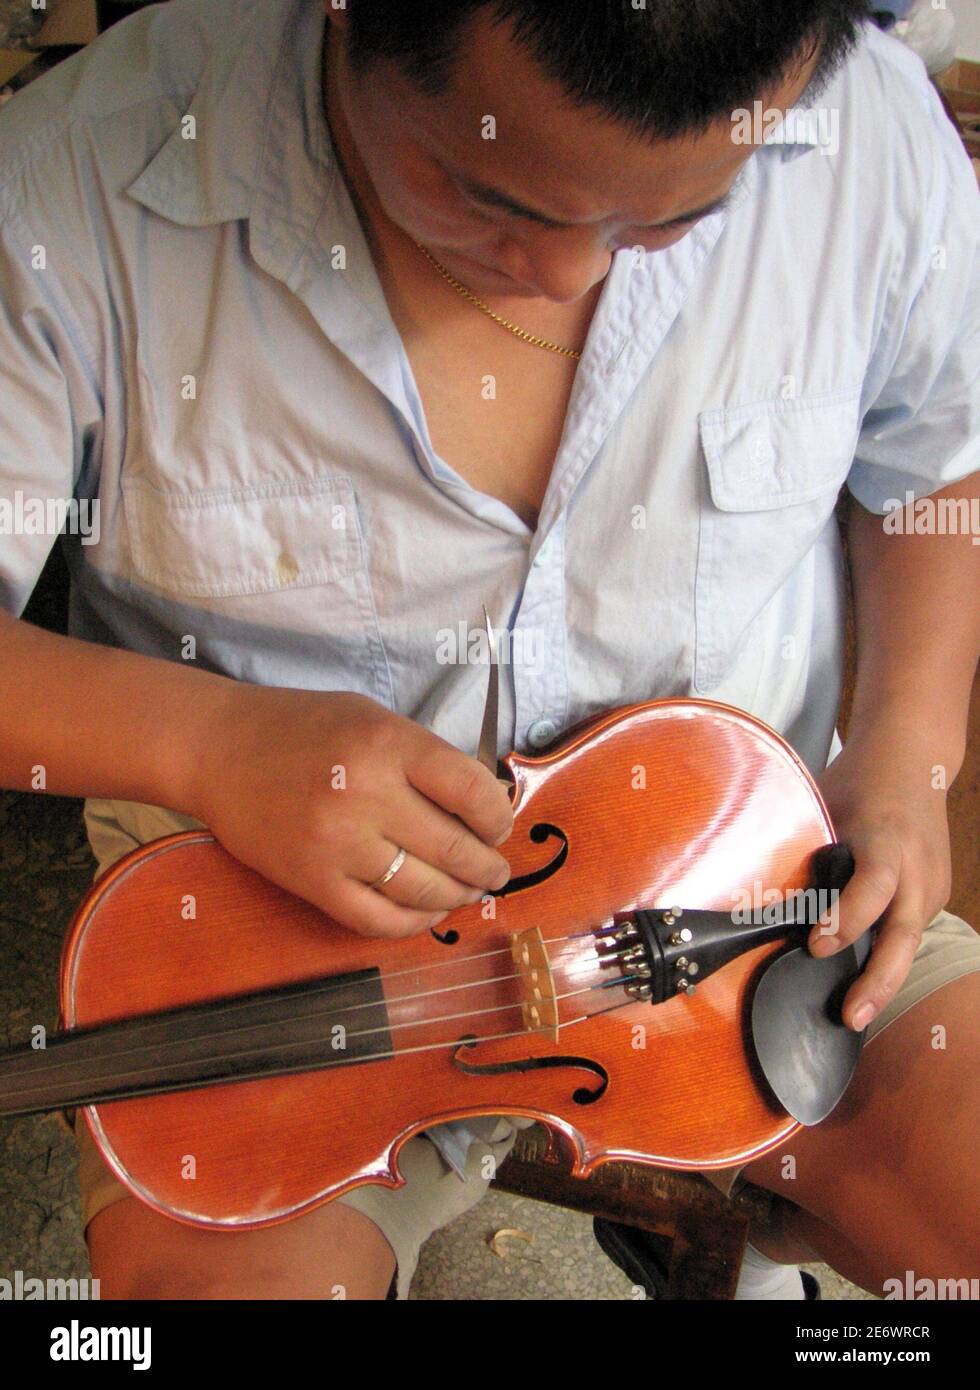 Zhang Chenjia puts the finishing touches on a violin at the Shanghai Lark Golden Bell Music Instruments workshop August 8, 2005. From bustling Shanghai to thriving Guangzhou, thousands of factories fashion up to 1 million instruments a year mostly bound for the U.S. and European markets, ranging from pedestrian students' violins to rarefied ones used in concerts that bear names like Andreas Eastman, Johannes Kohr and Andrew Schroetter. Picture taken August 8, 2005. To match feature LEISURE-CHINA-VIOLINS REUTERS/Jerker Hellstrom  CC/YH Stock Photo